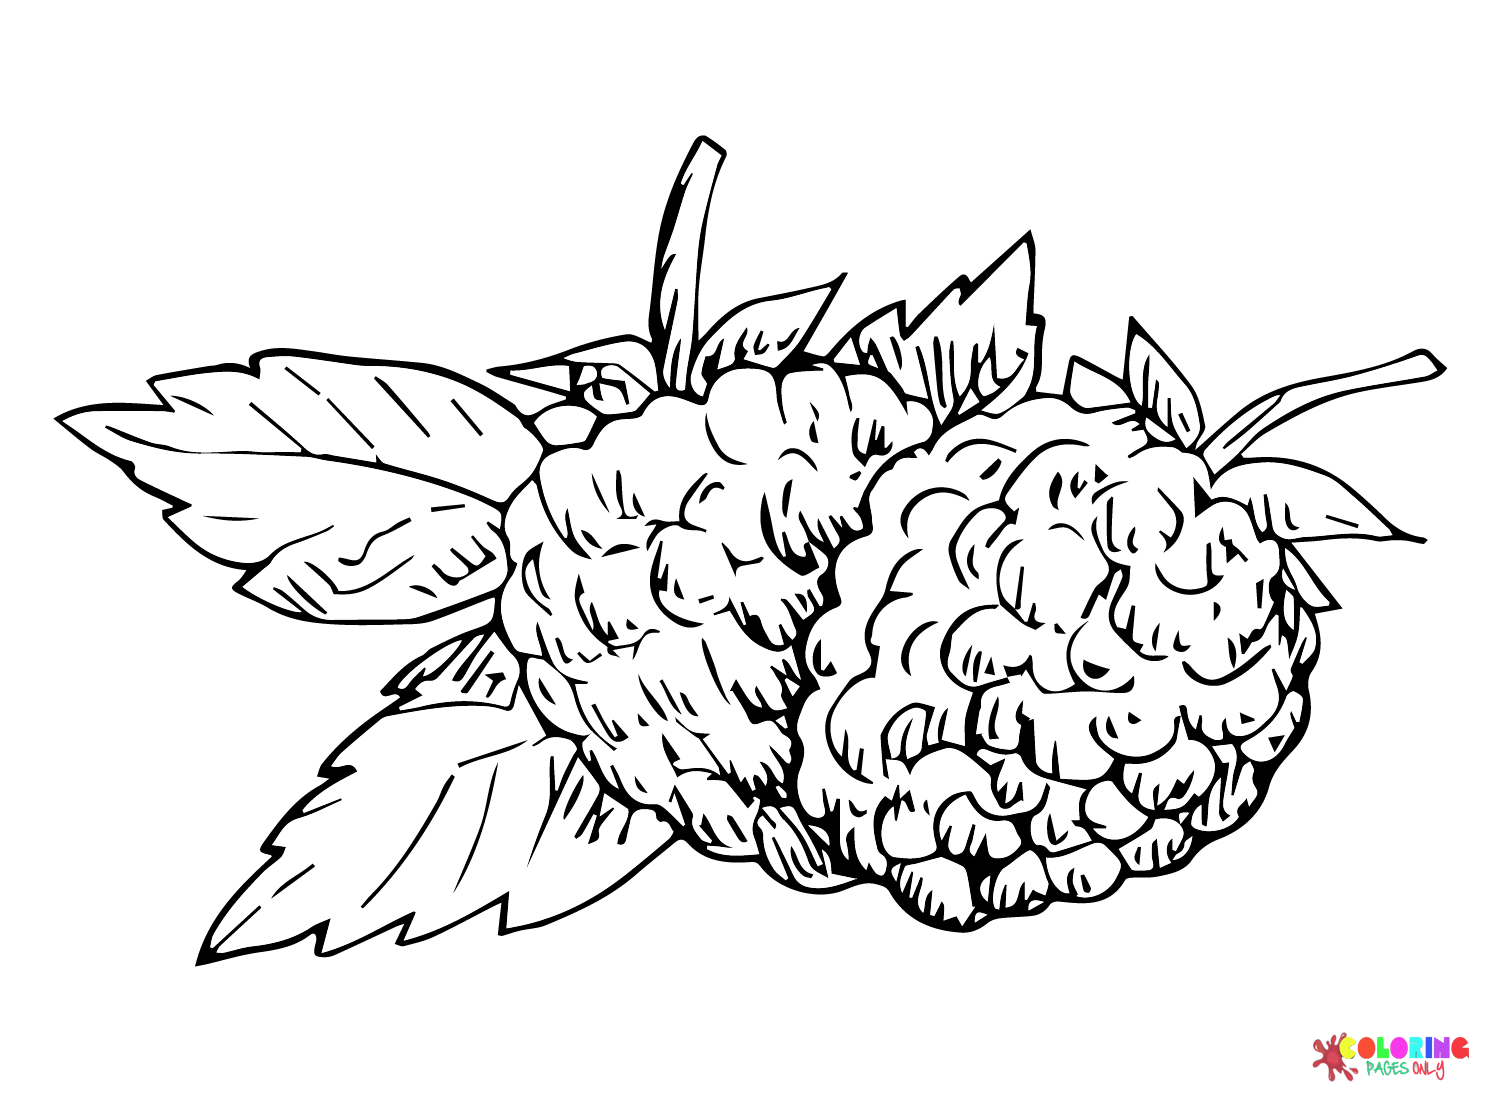 Big Blackberry Coloring Page